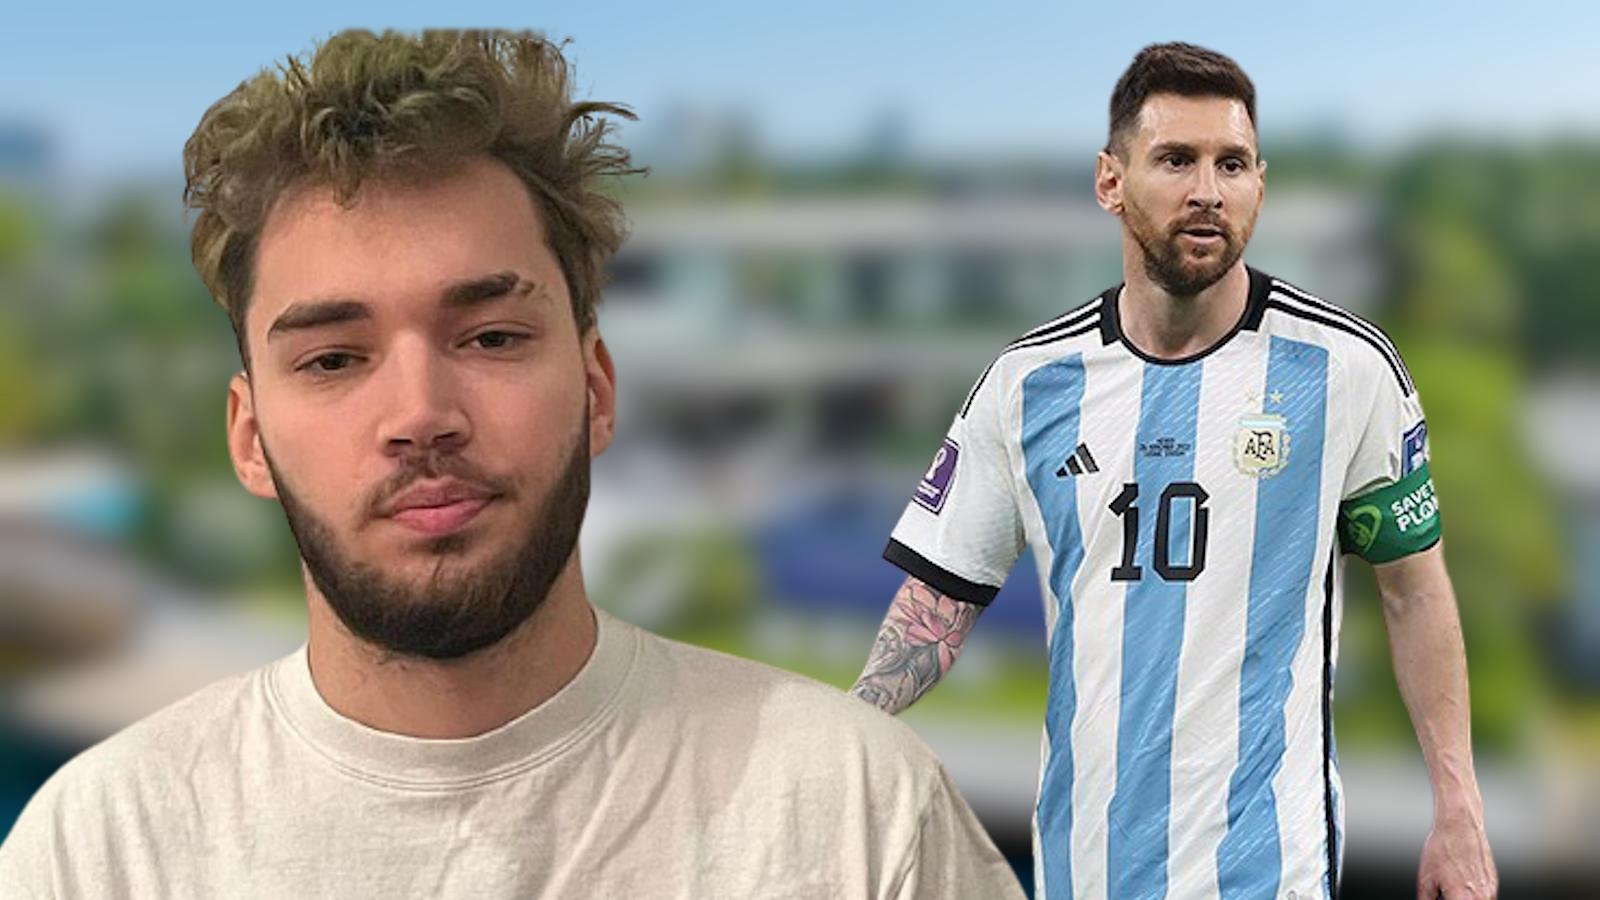 Adin Ross and Lionel Messi in front of blurred mansion.